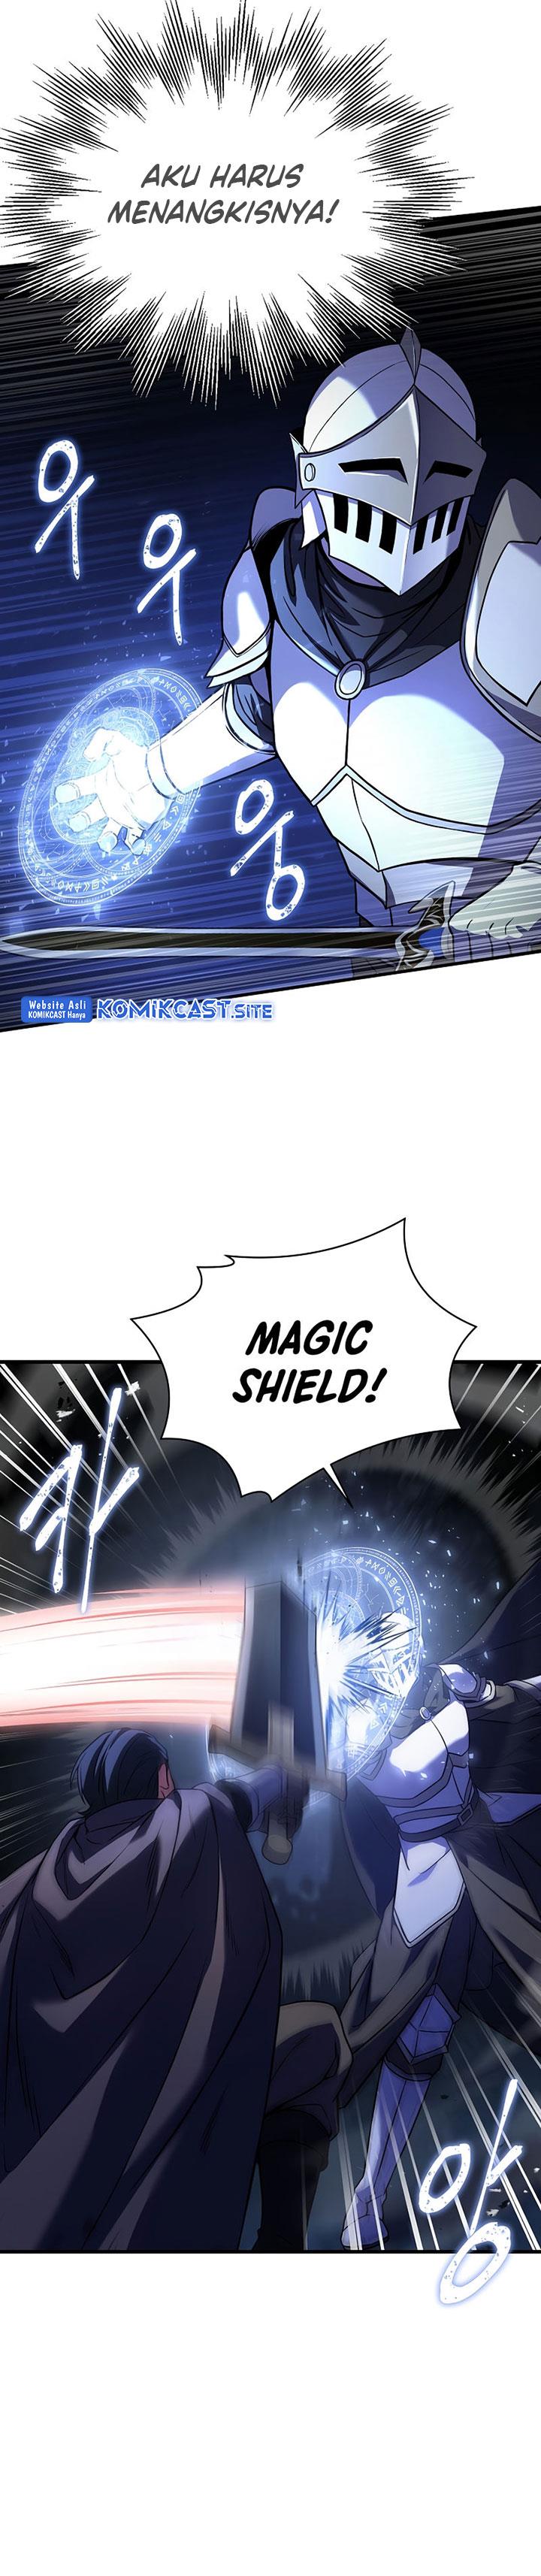 Rebirth of the 8-Circled Mage Chapter 118